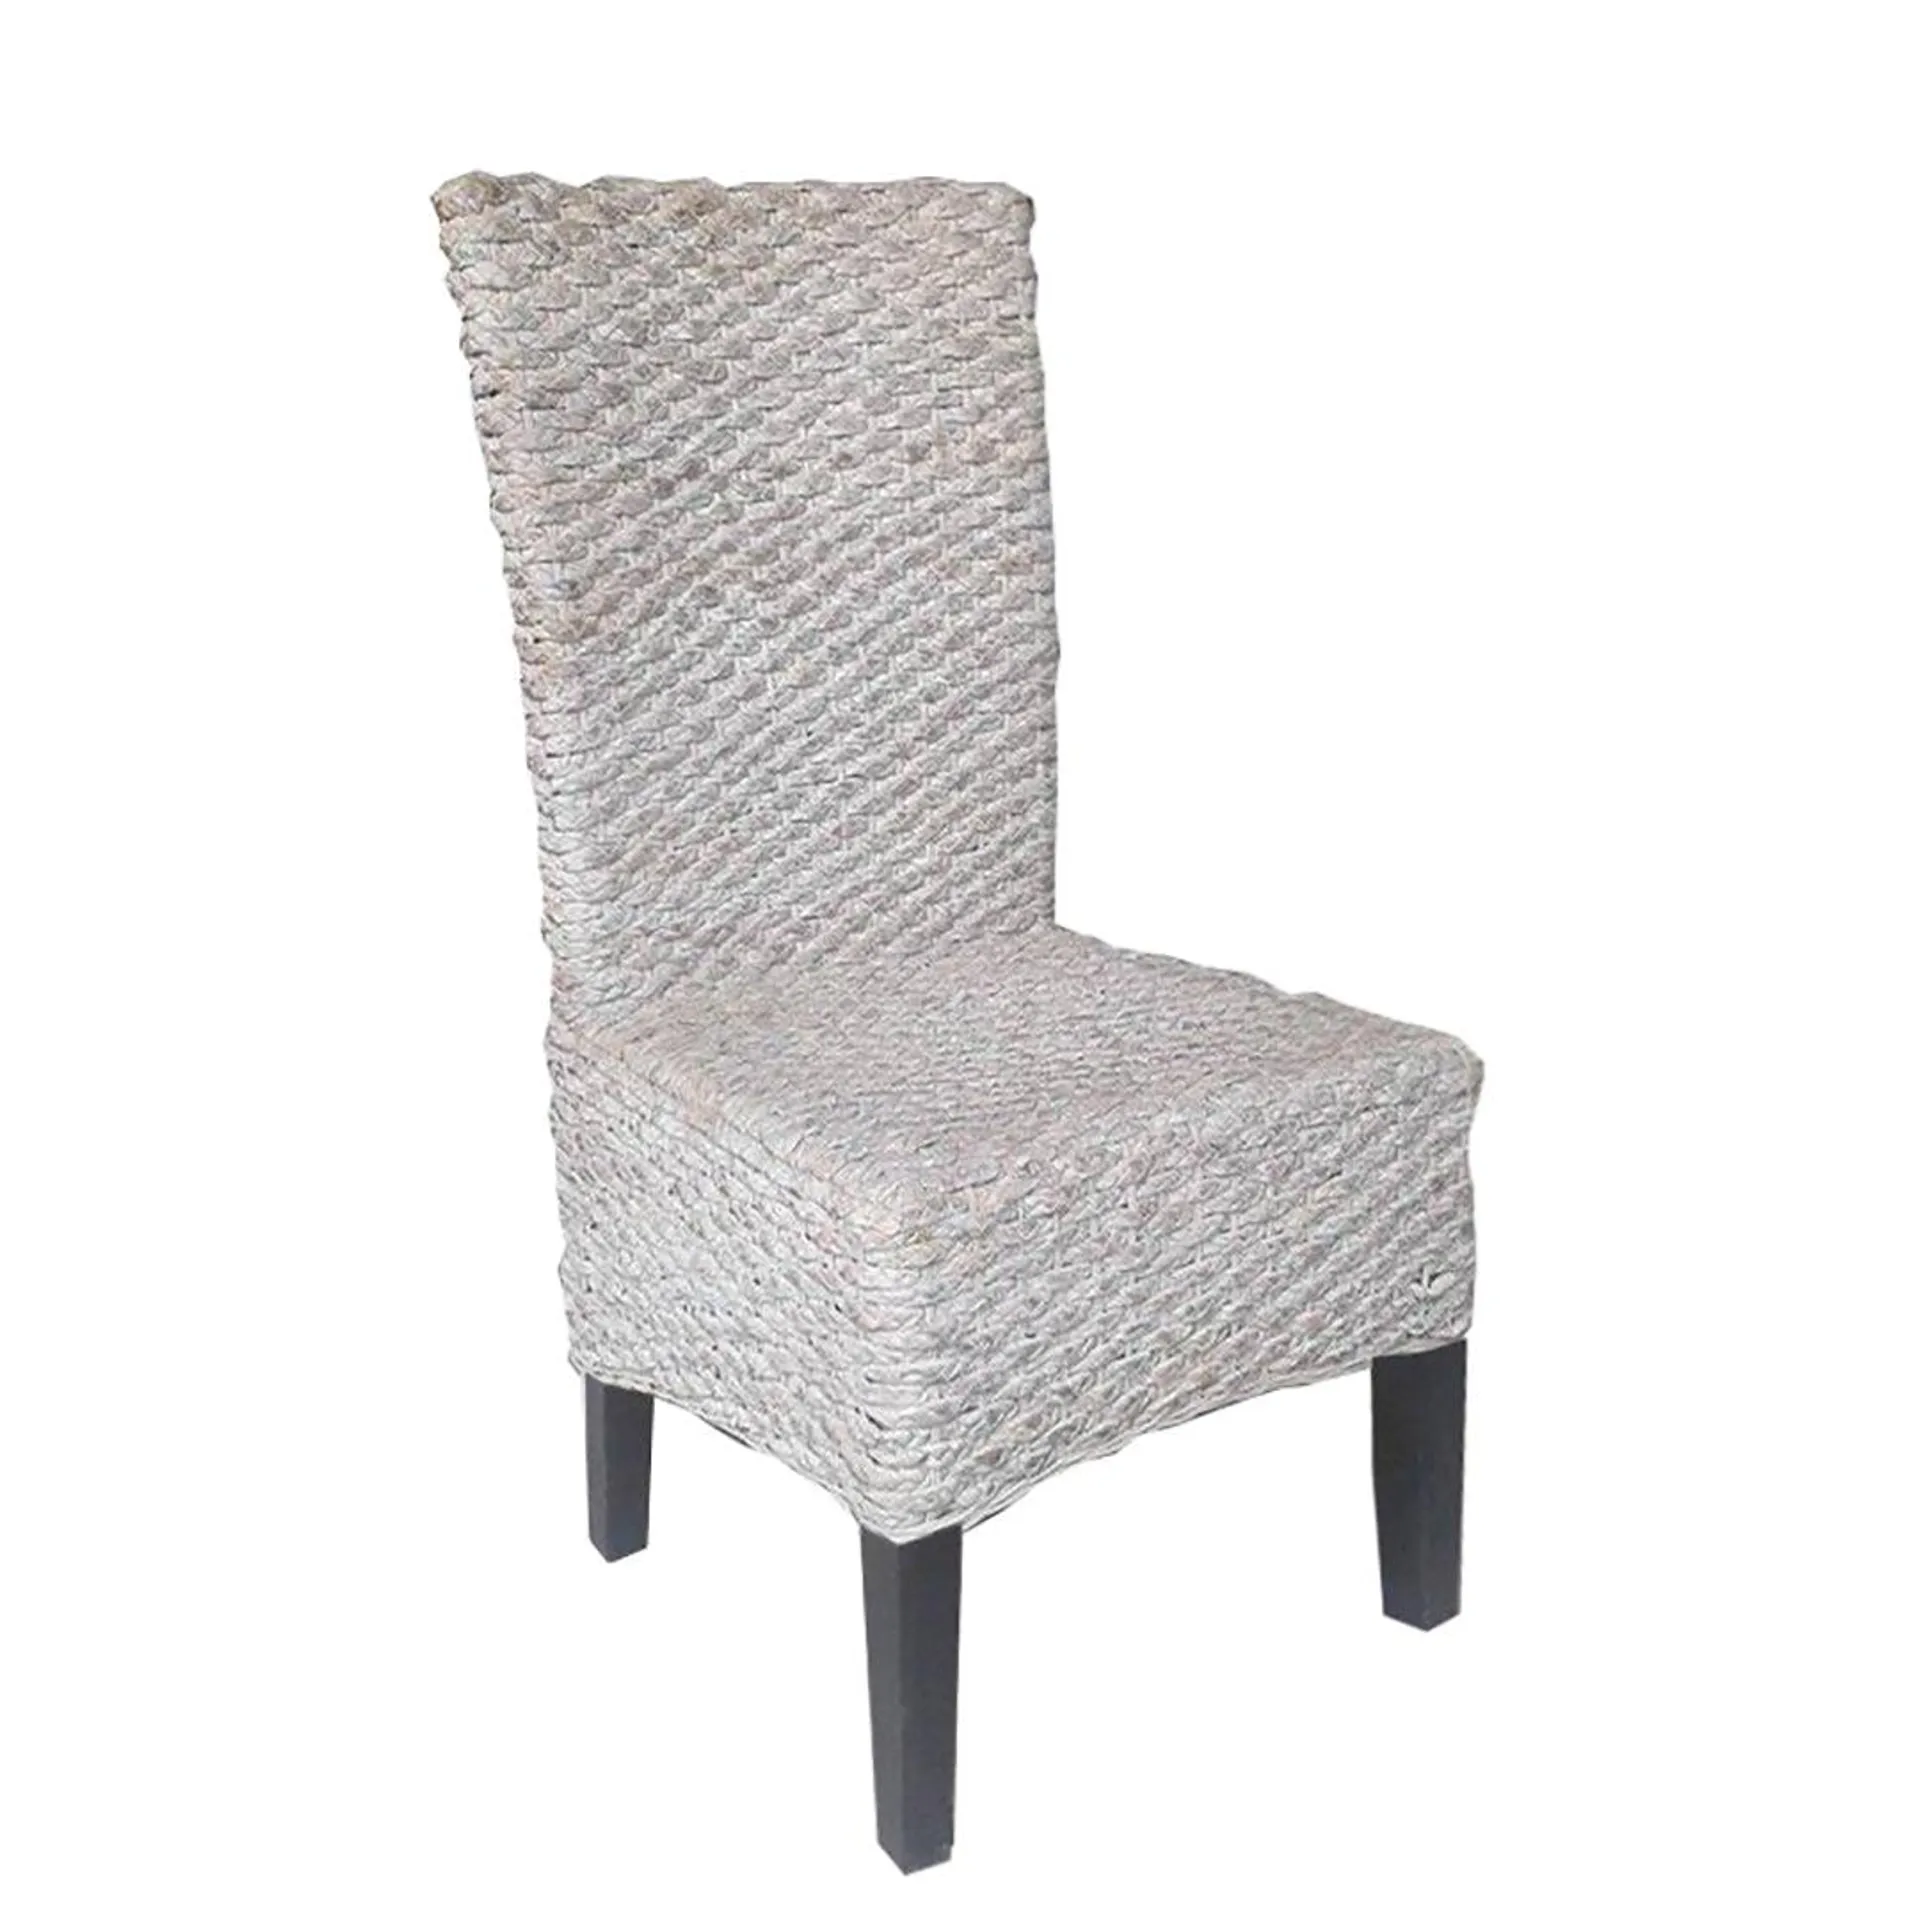 Atlantic Dining Chair (3 colors)